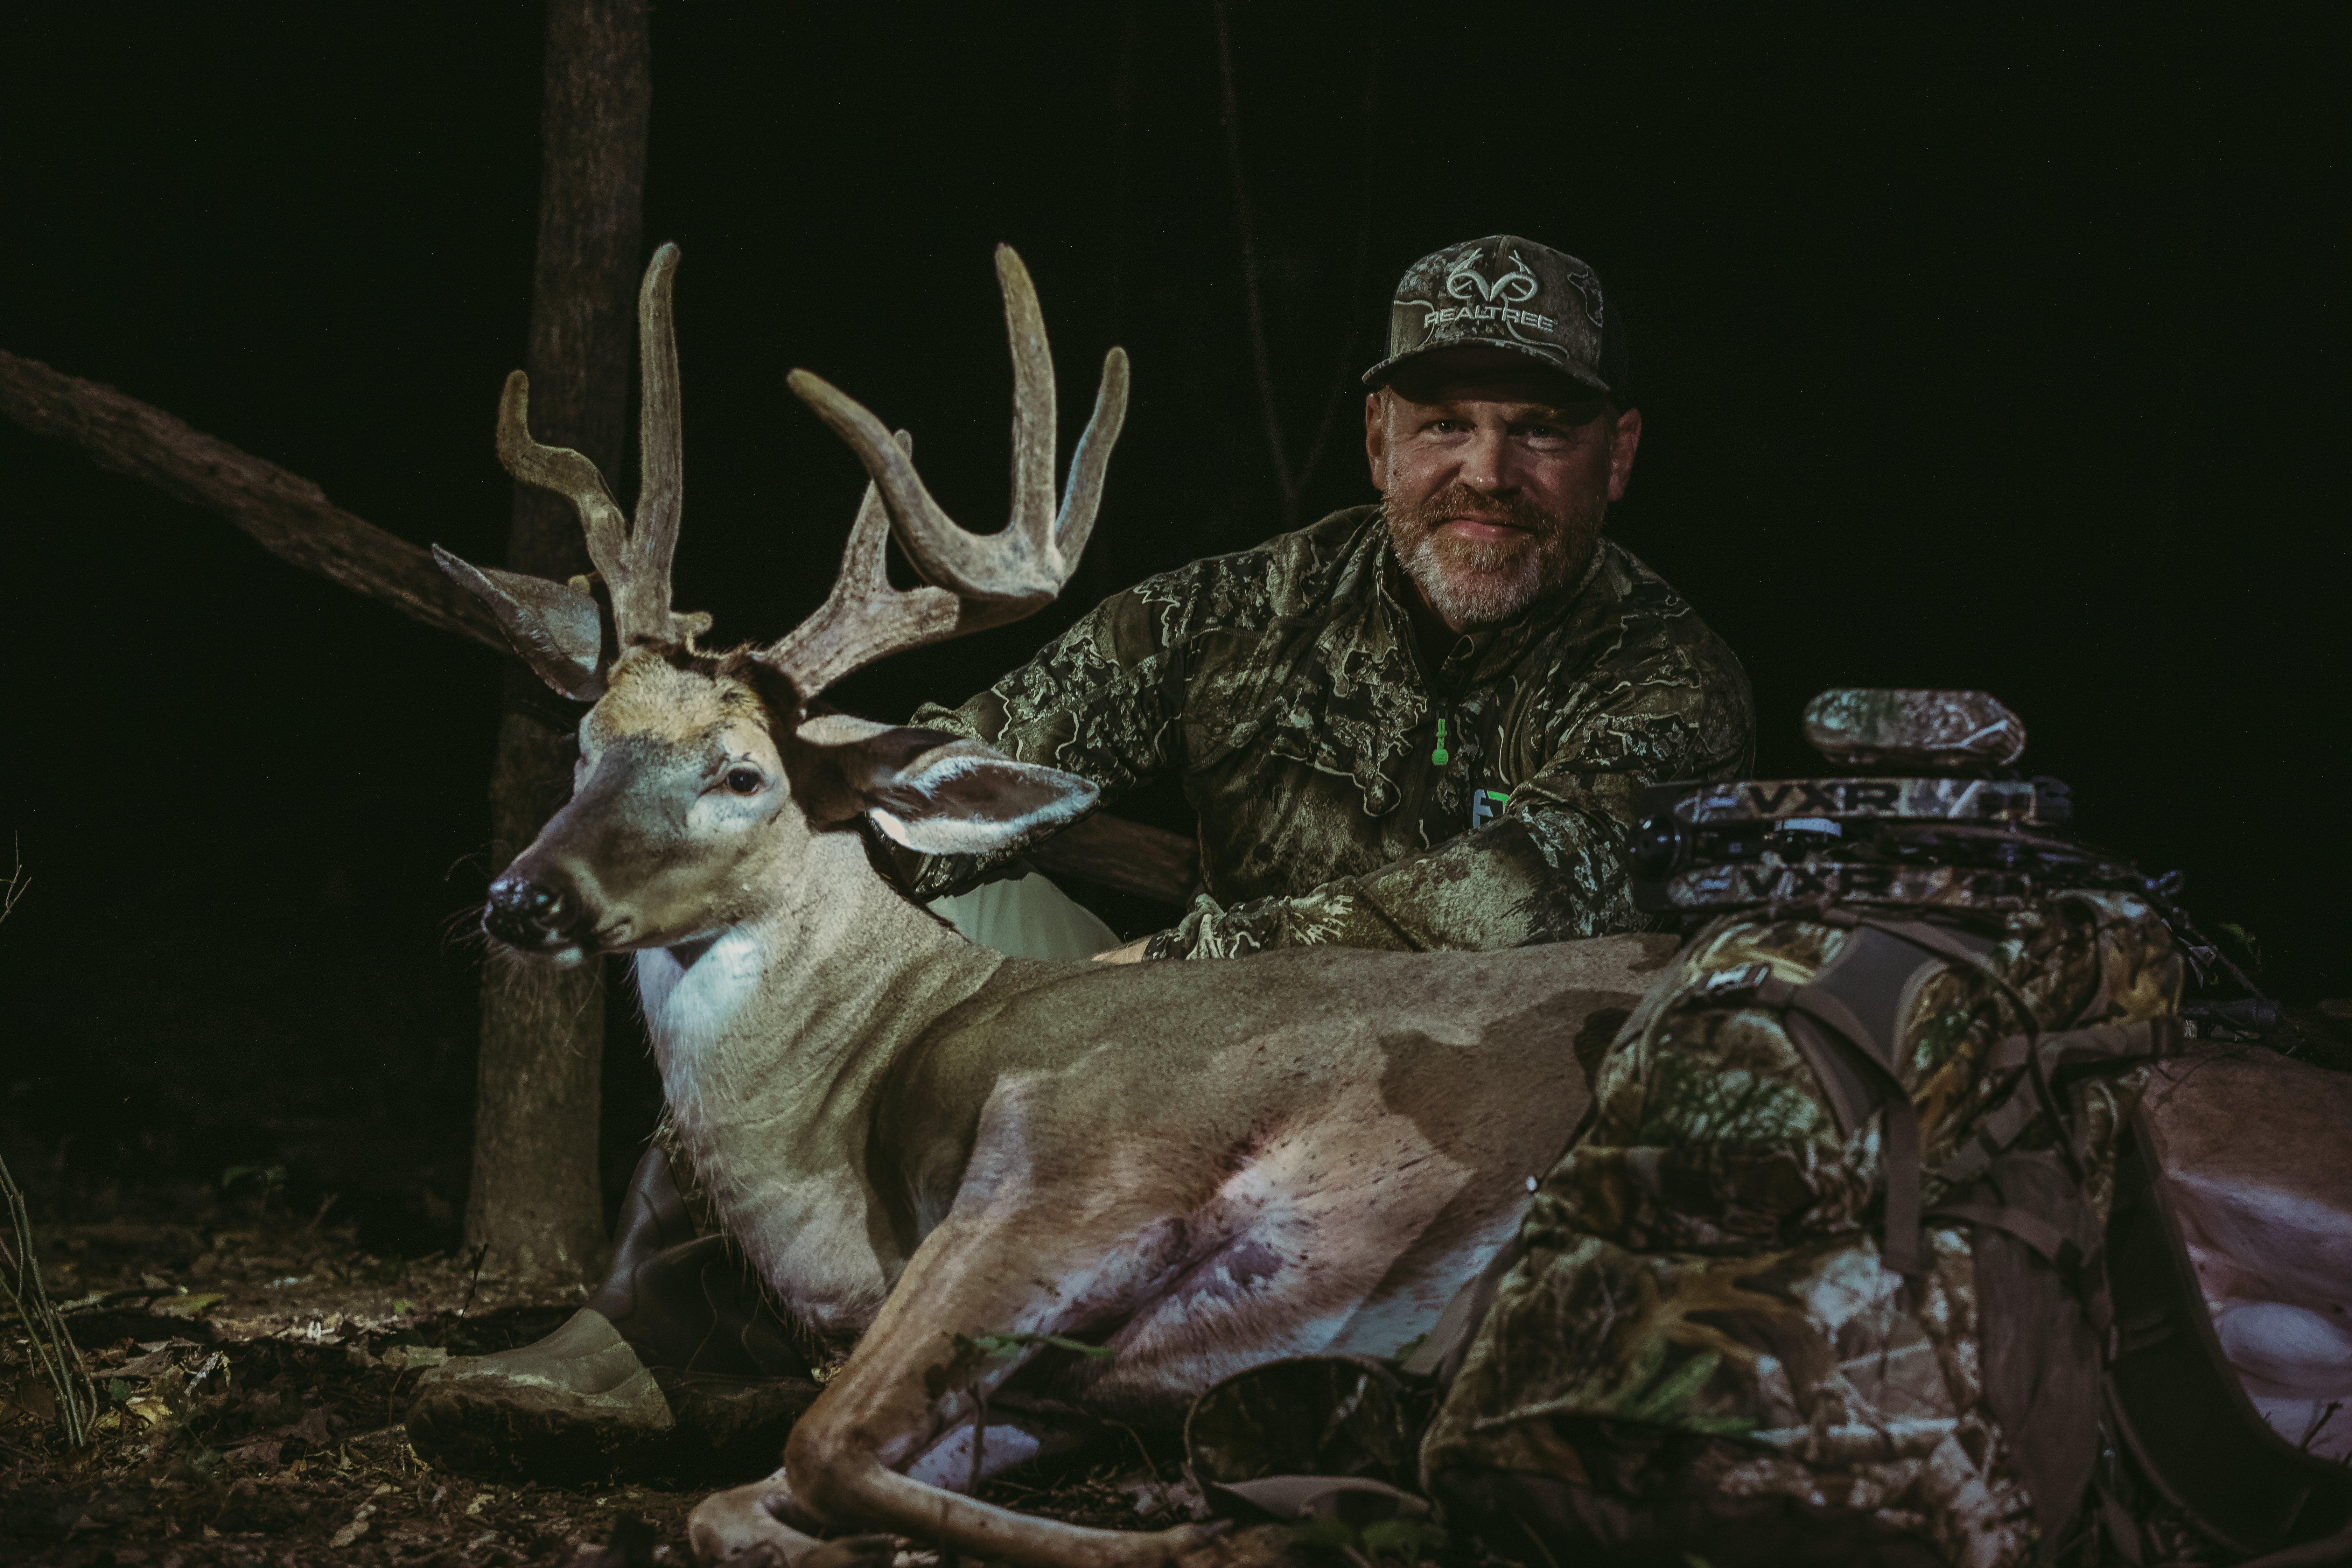 Brodie Swisher's full-velvet stud was a highlight of the week. (Realtree Image / Kerry Wix)